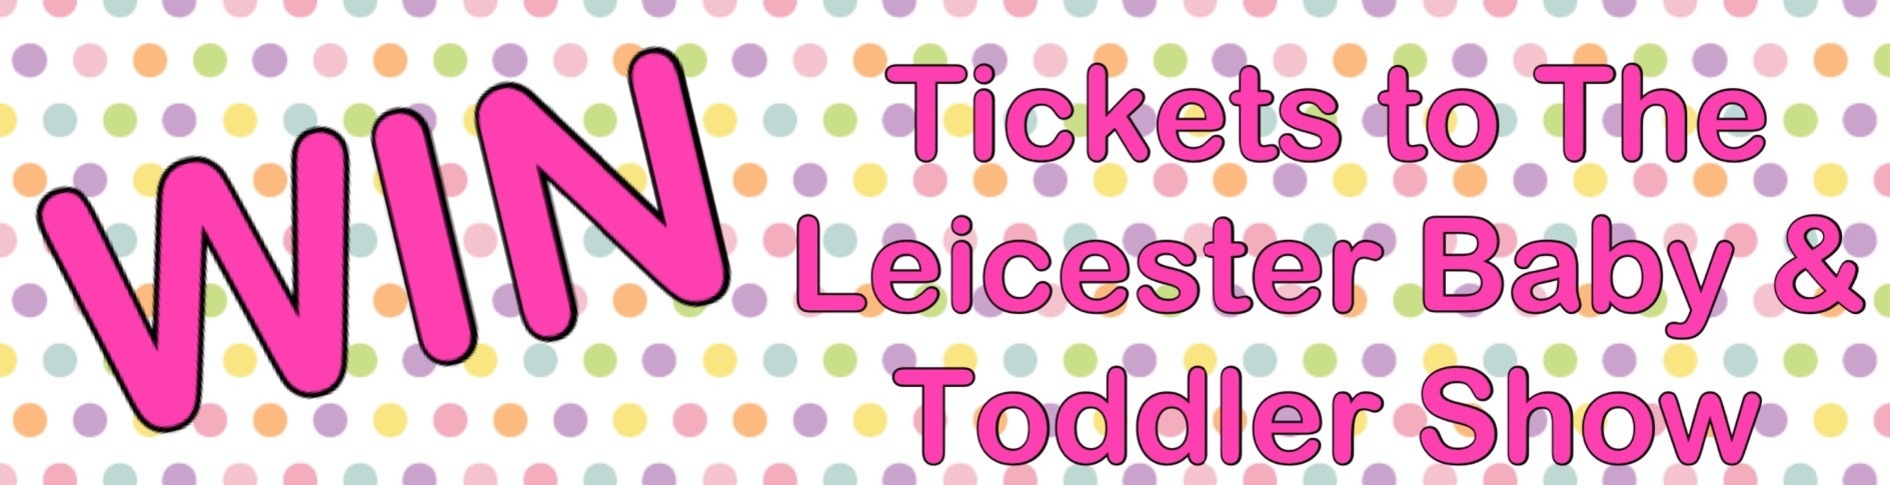 Win tickets to the leicester baby toddler show